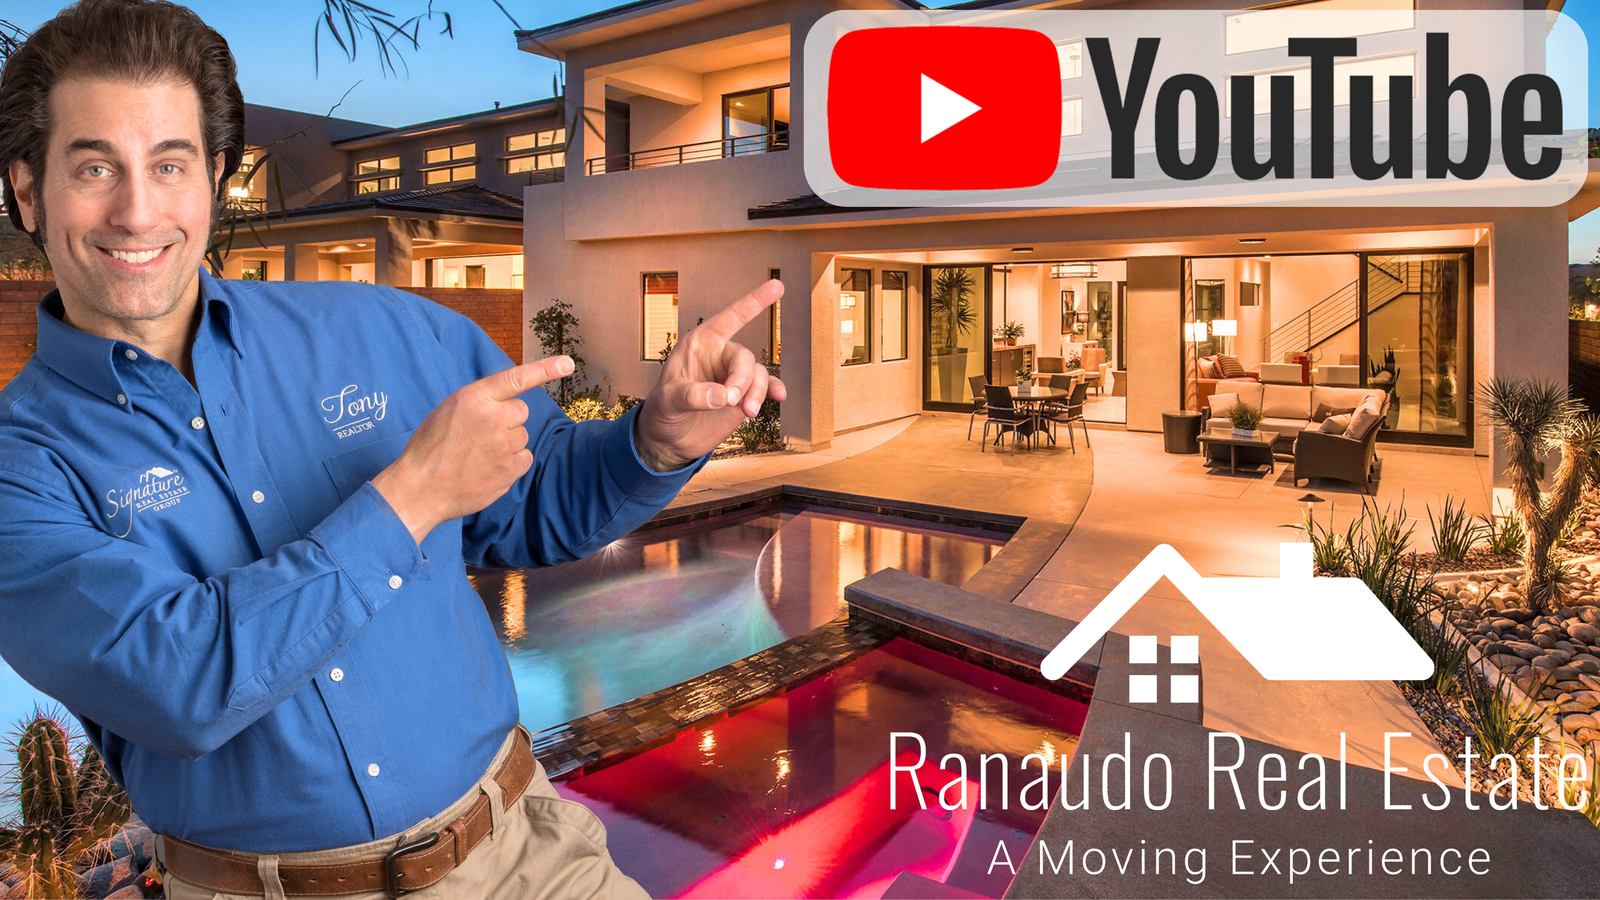 Tony Ranaudo YouTube Channel about Real Estate, click photo to access channel